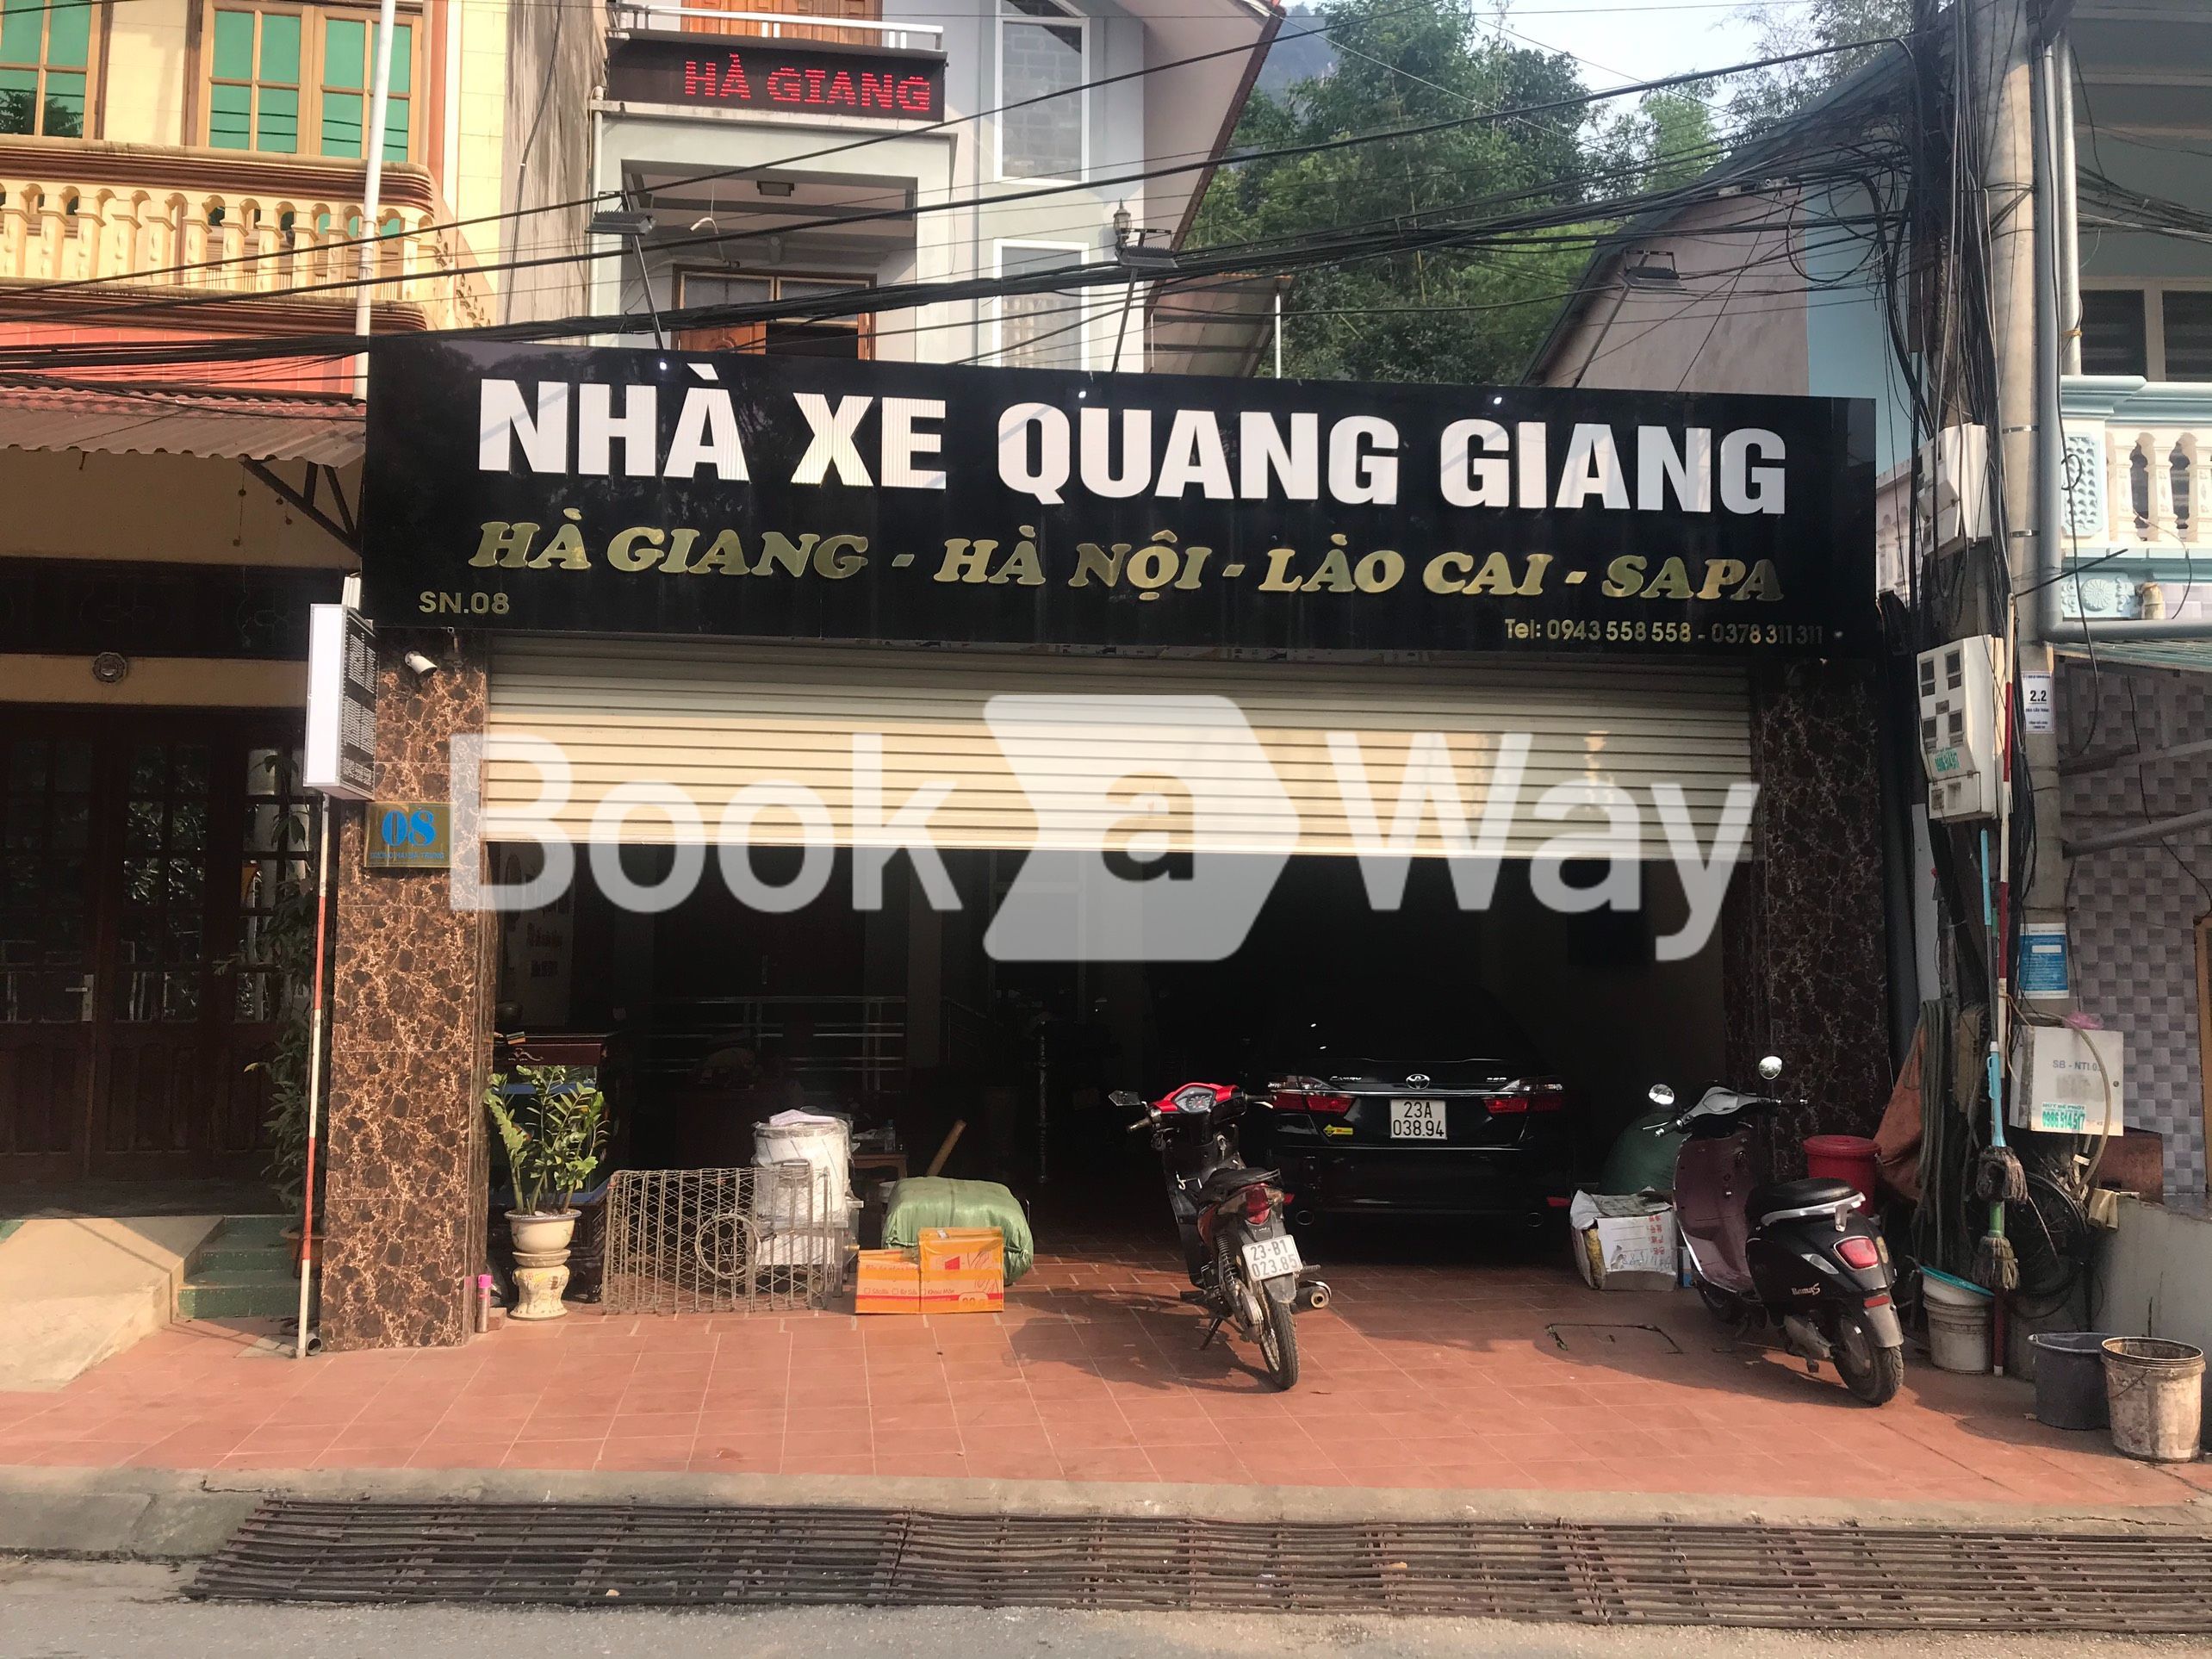 Quang Giang office